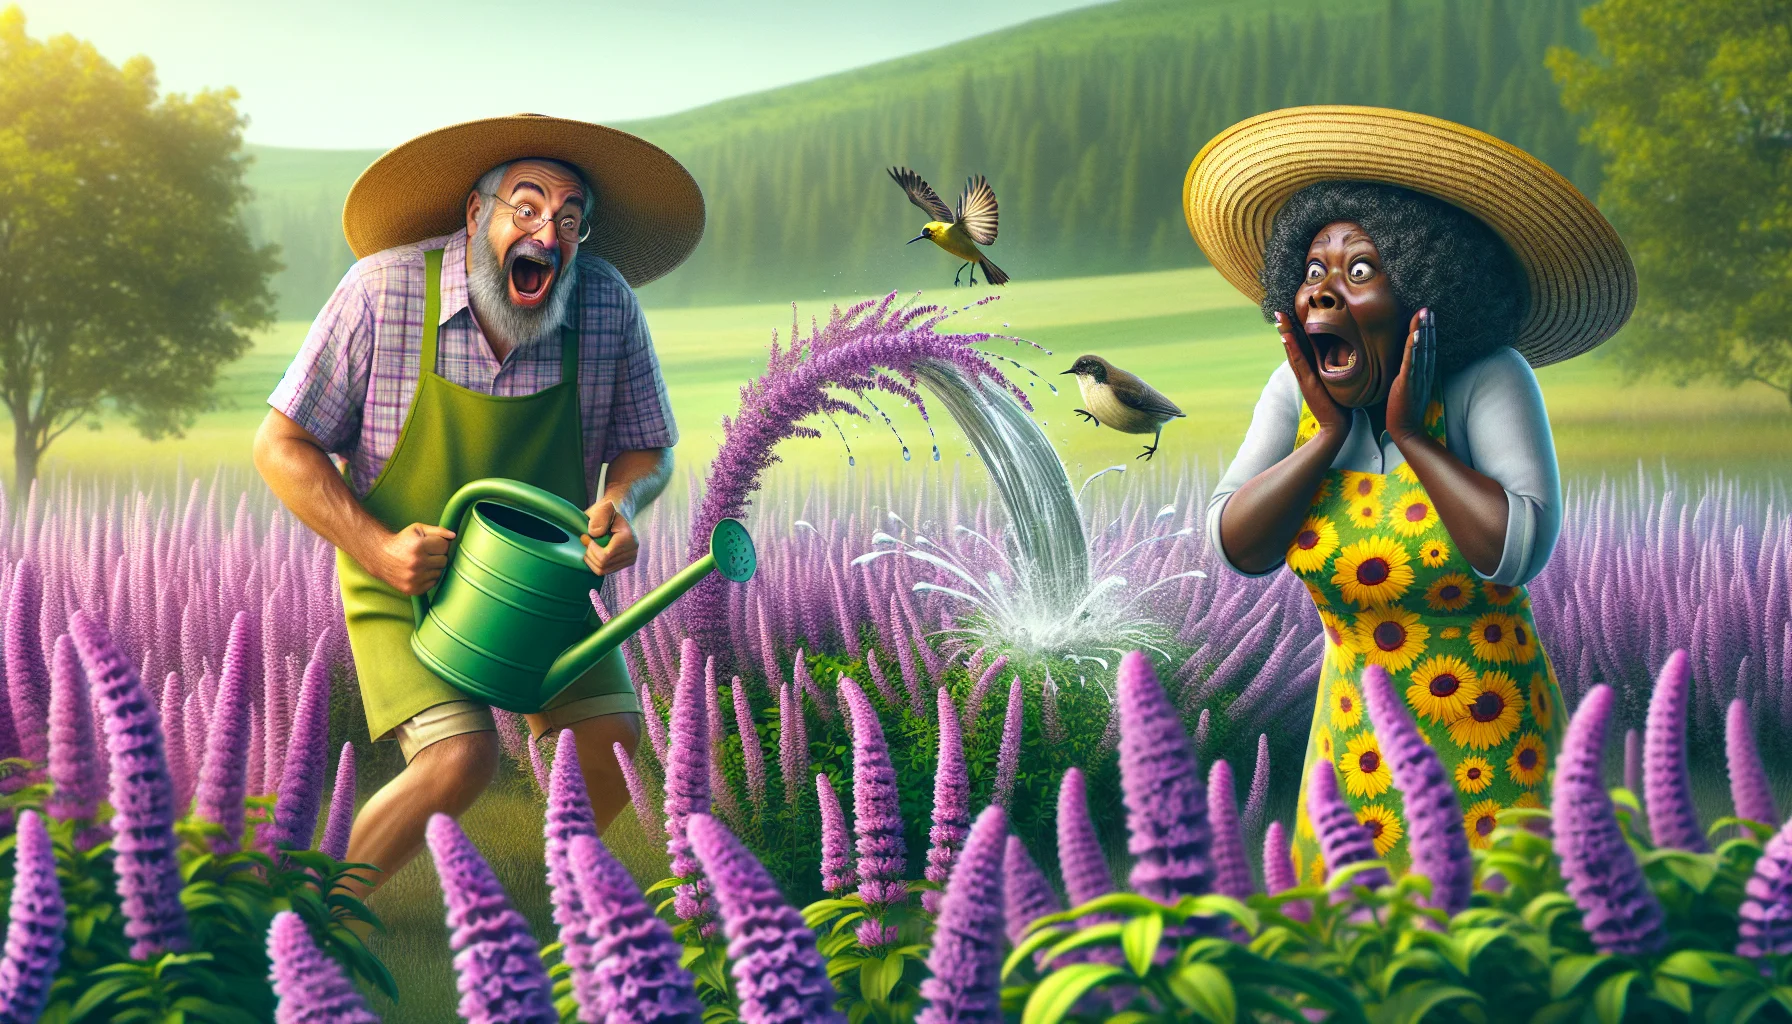 Visualize a humorous scenario taking place in a green meadow full of beautiful lavender-colored meadow sage flowers. These vibrant plants sway gently in the breeze, catching the sunlight that dapples through the surrounding trees. On one side, an enthusiastic Caucasian man with a floppy garden hat, holding a rather large watering can, is shown mid-step, his face depicting the joy of nurturing these flowers. Opposite him, a Black woman, wearing a sunflower patterned apron, has a surprised look as a small bird has mistaken her straw hat for a nest. This light-hearted scene embodies the essence of gardening, the minor unexpected delights and the satisfaction it brings.